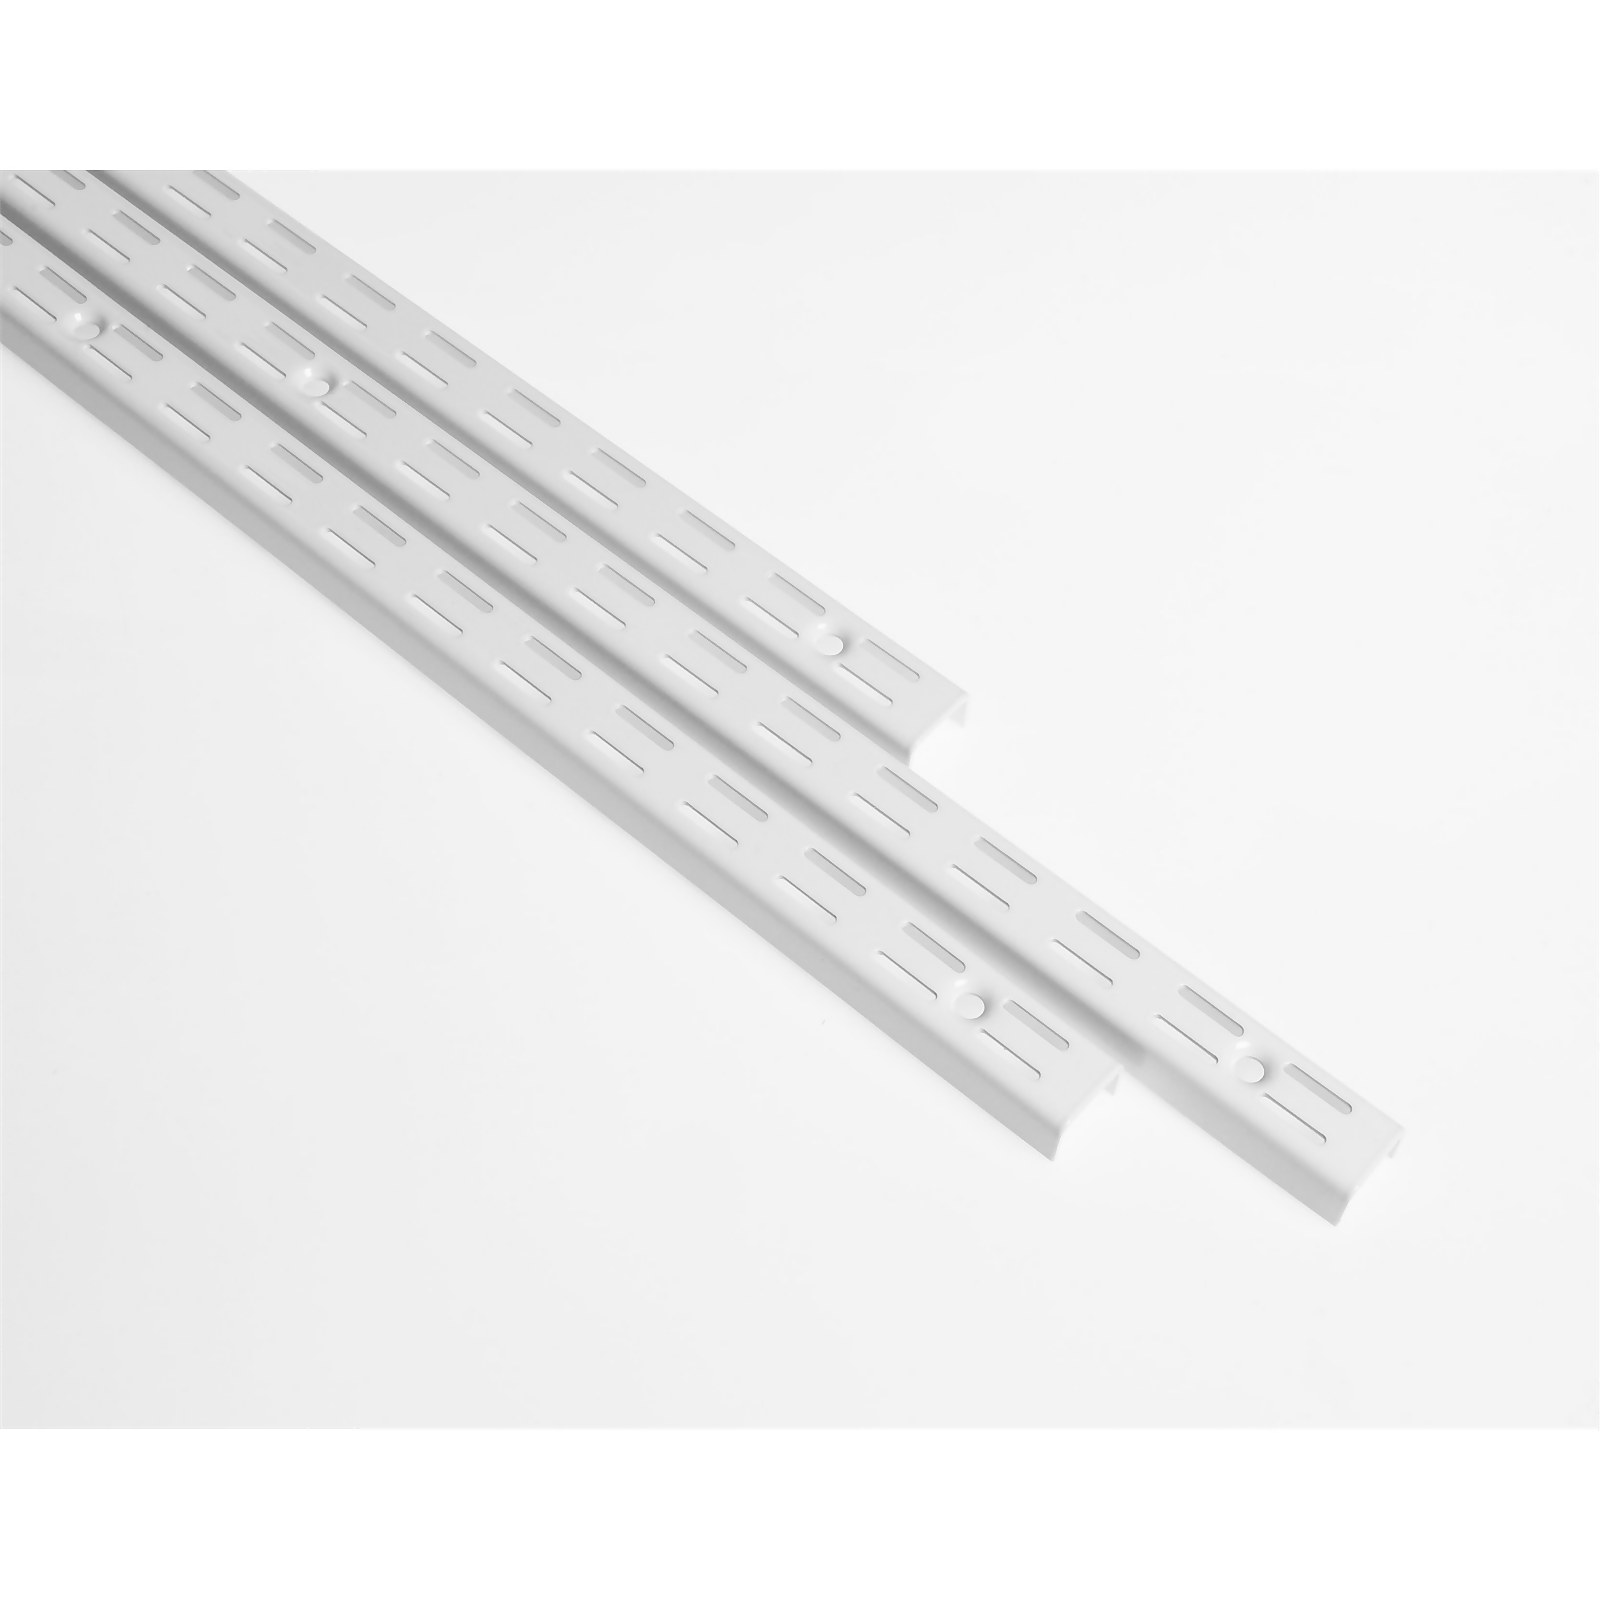 Photo of Anti-bacterial Twin Slot Shelving Kit - 1219mm White Twinslot And 216mm Brackets - White